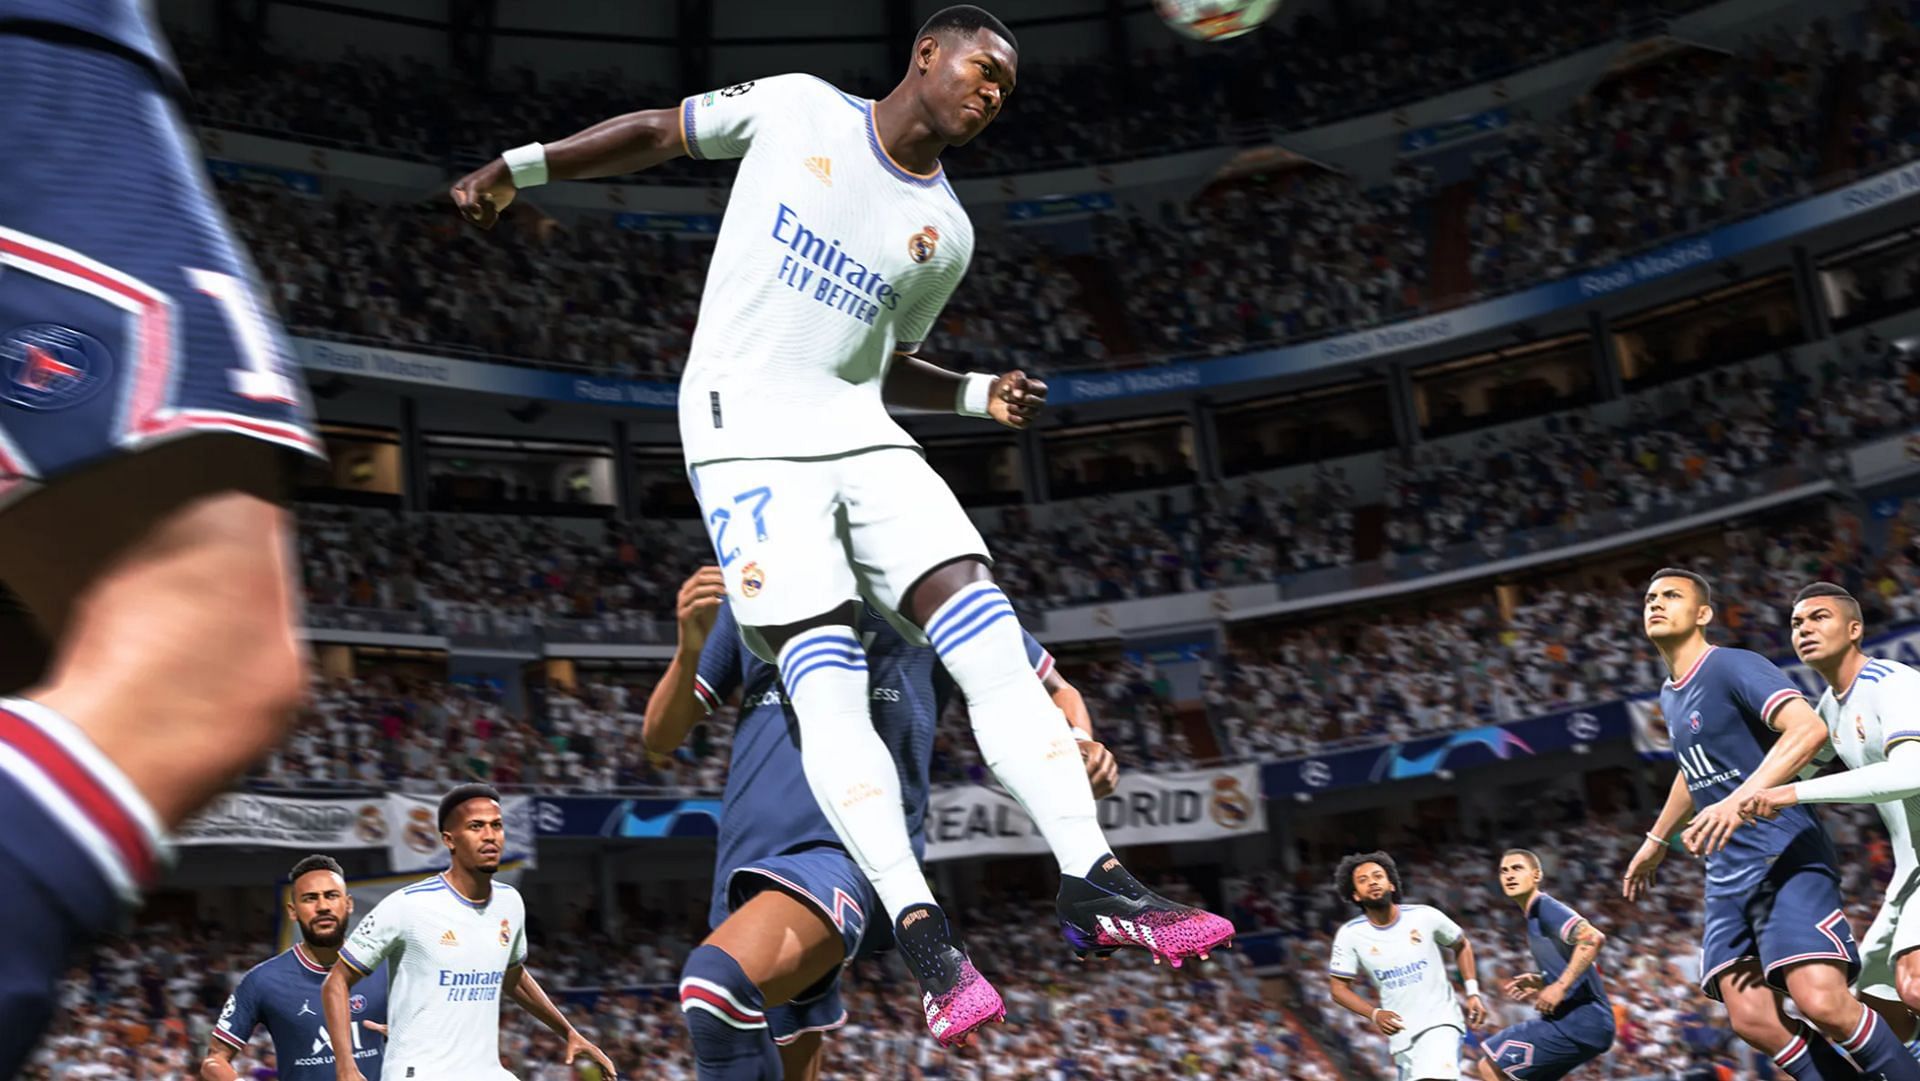 The new license could bring more authenticity to teams from the league like Real Madrid (Image via EA Sports)